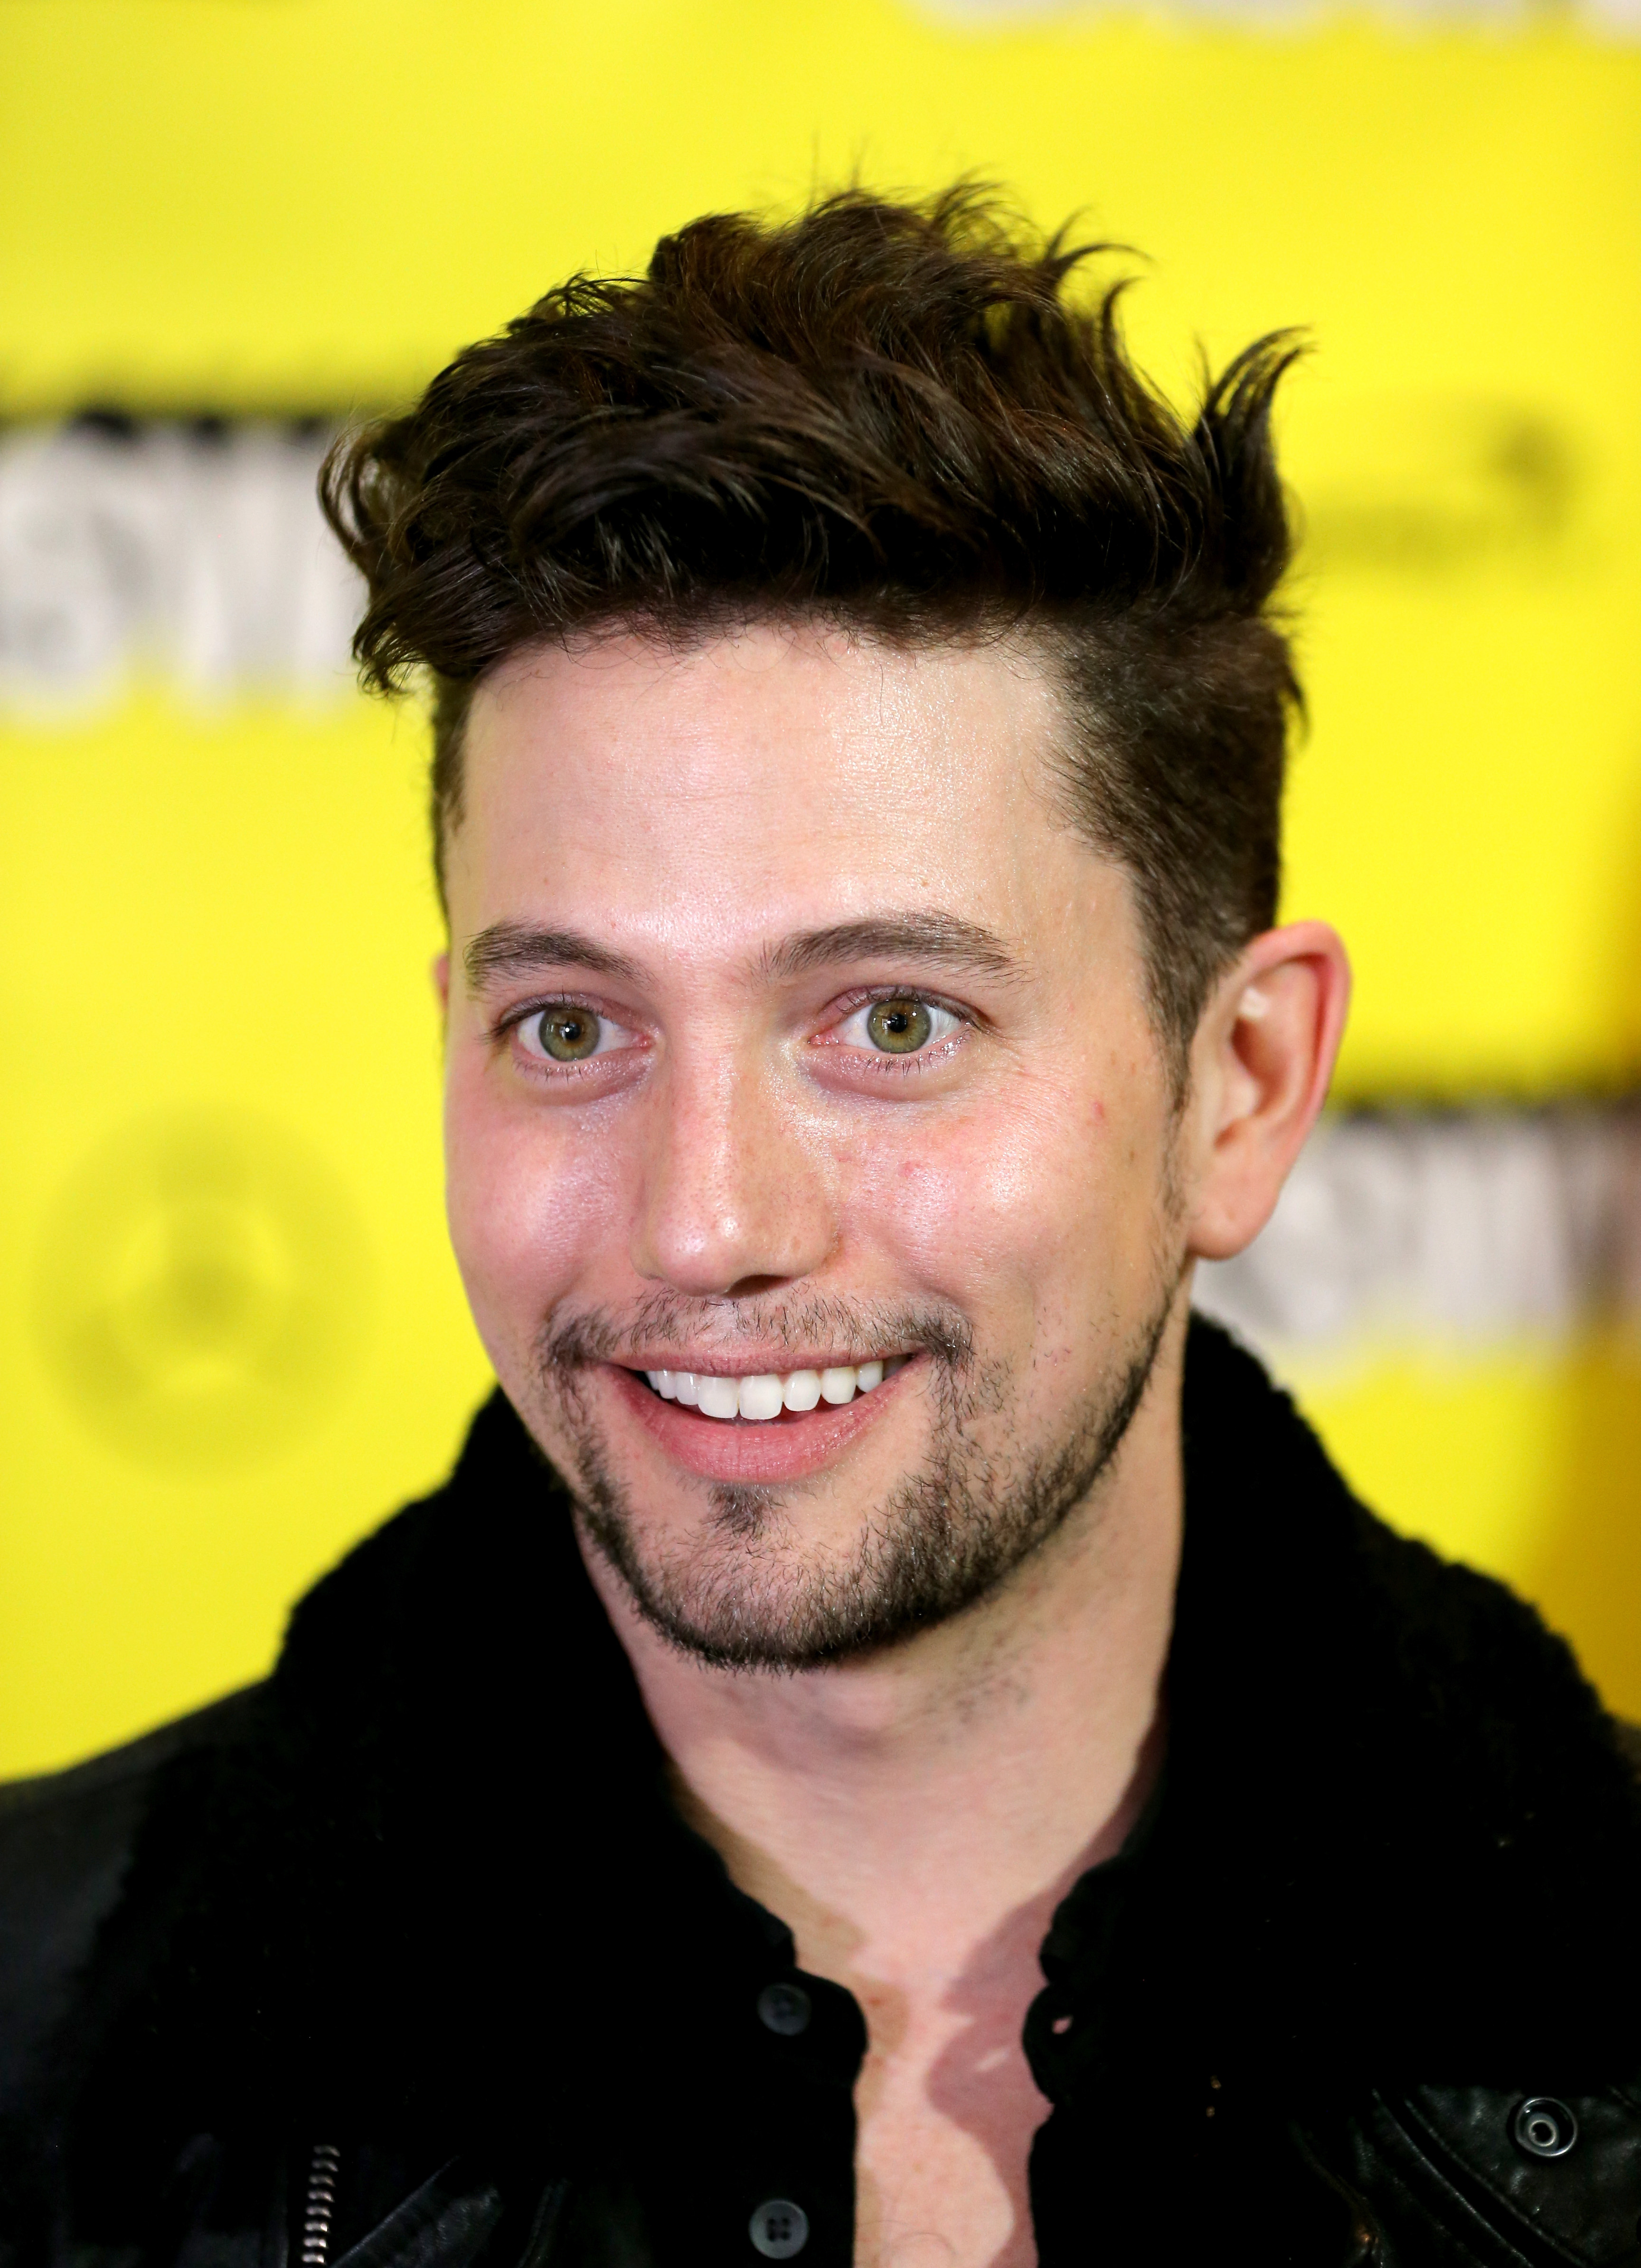 Jackson Rathbone attends The Wall of Mexico during the 2019 SXSW Conference and Festivals